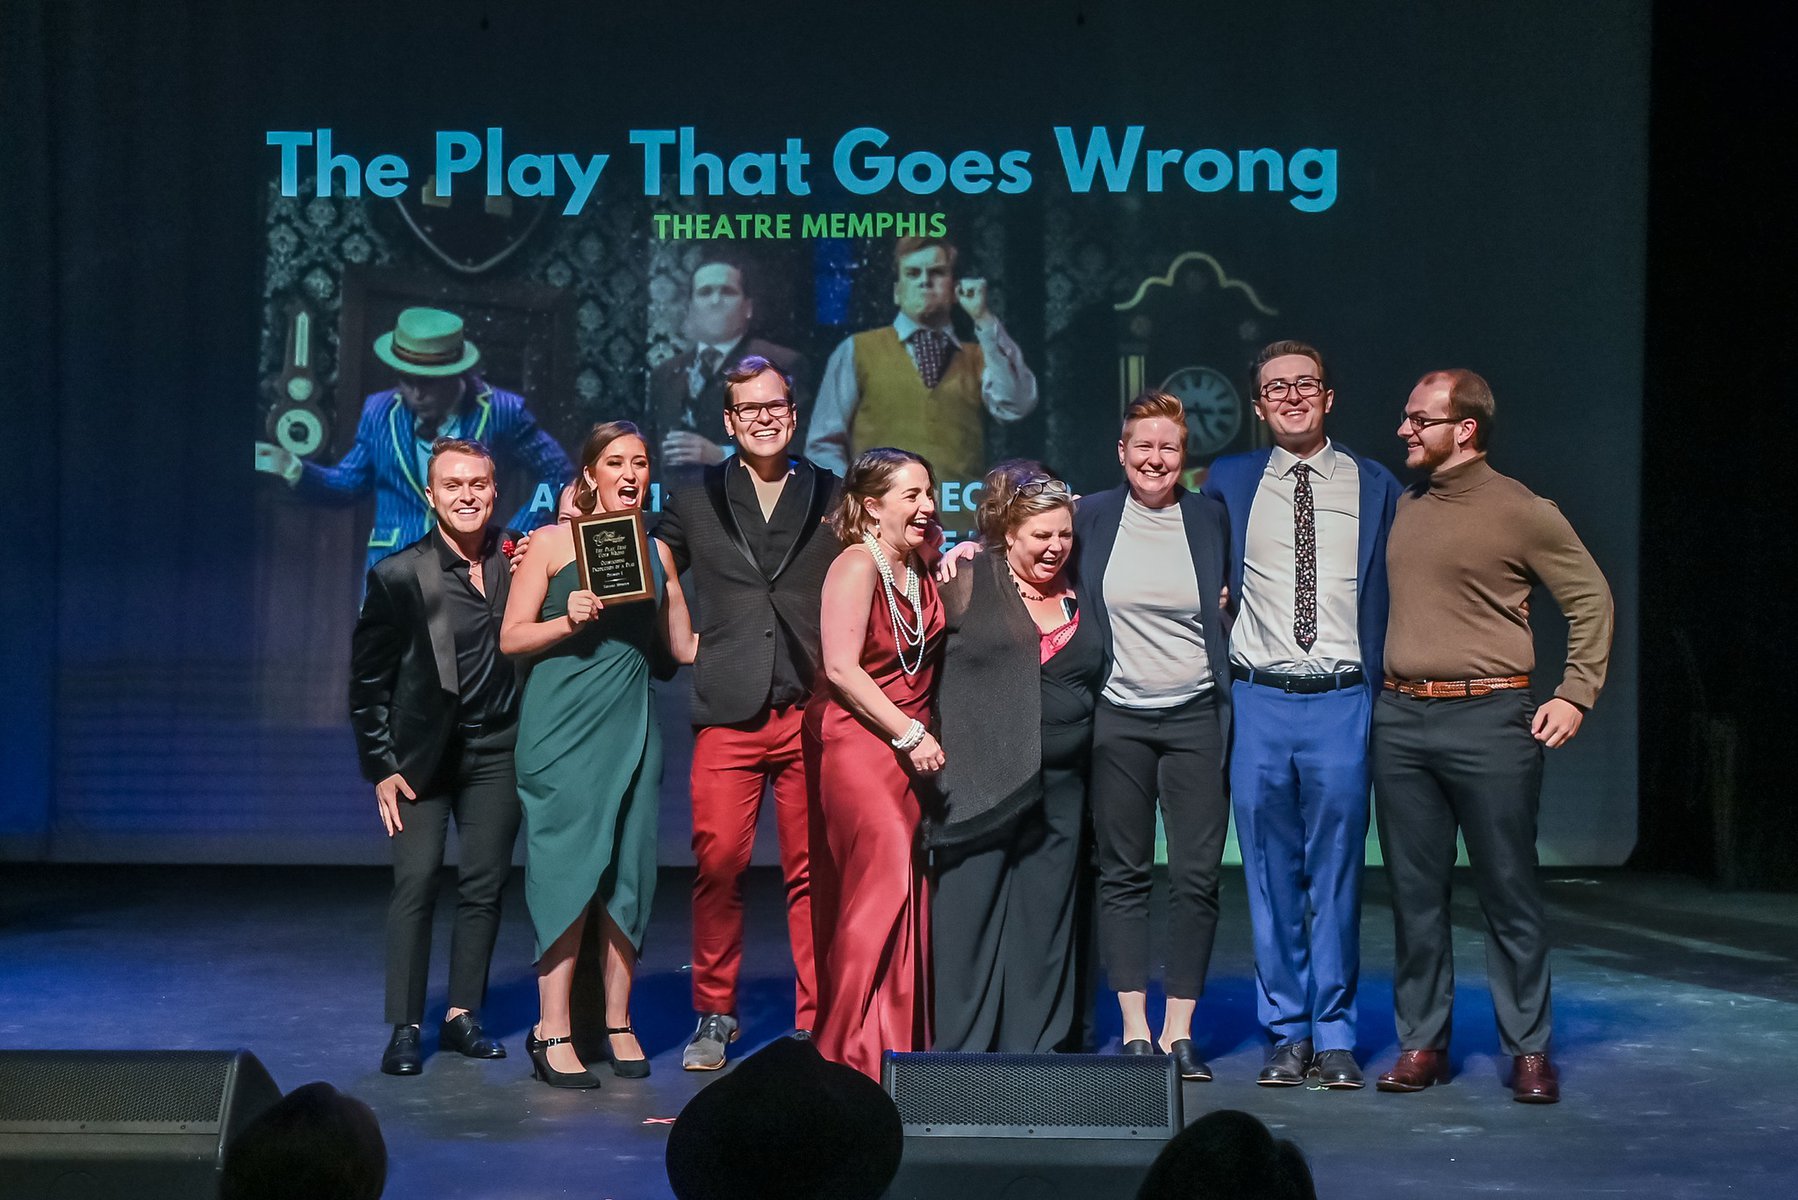 Cast of The Play That Went Wrong at the 39th Ostrander Awards